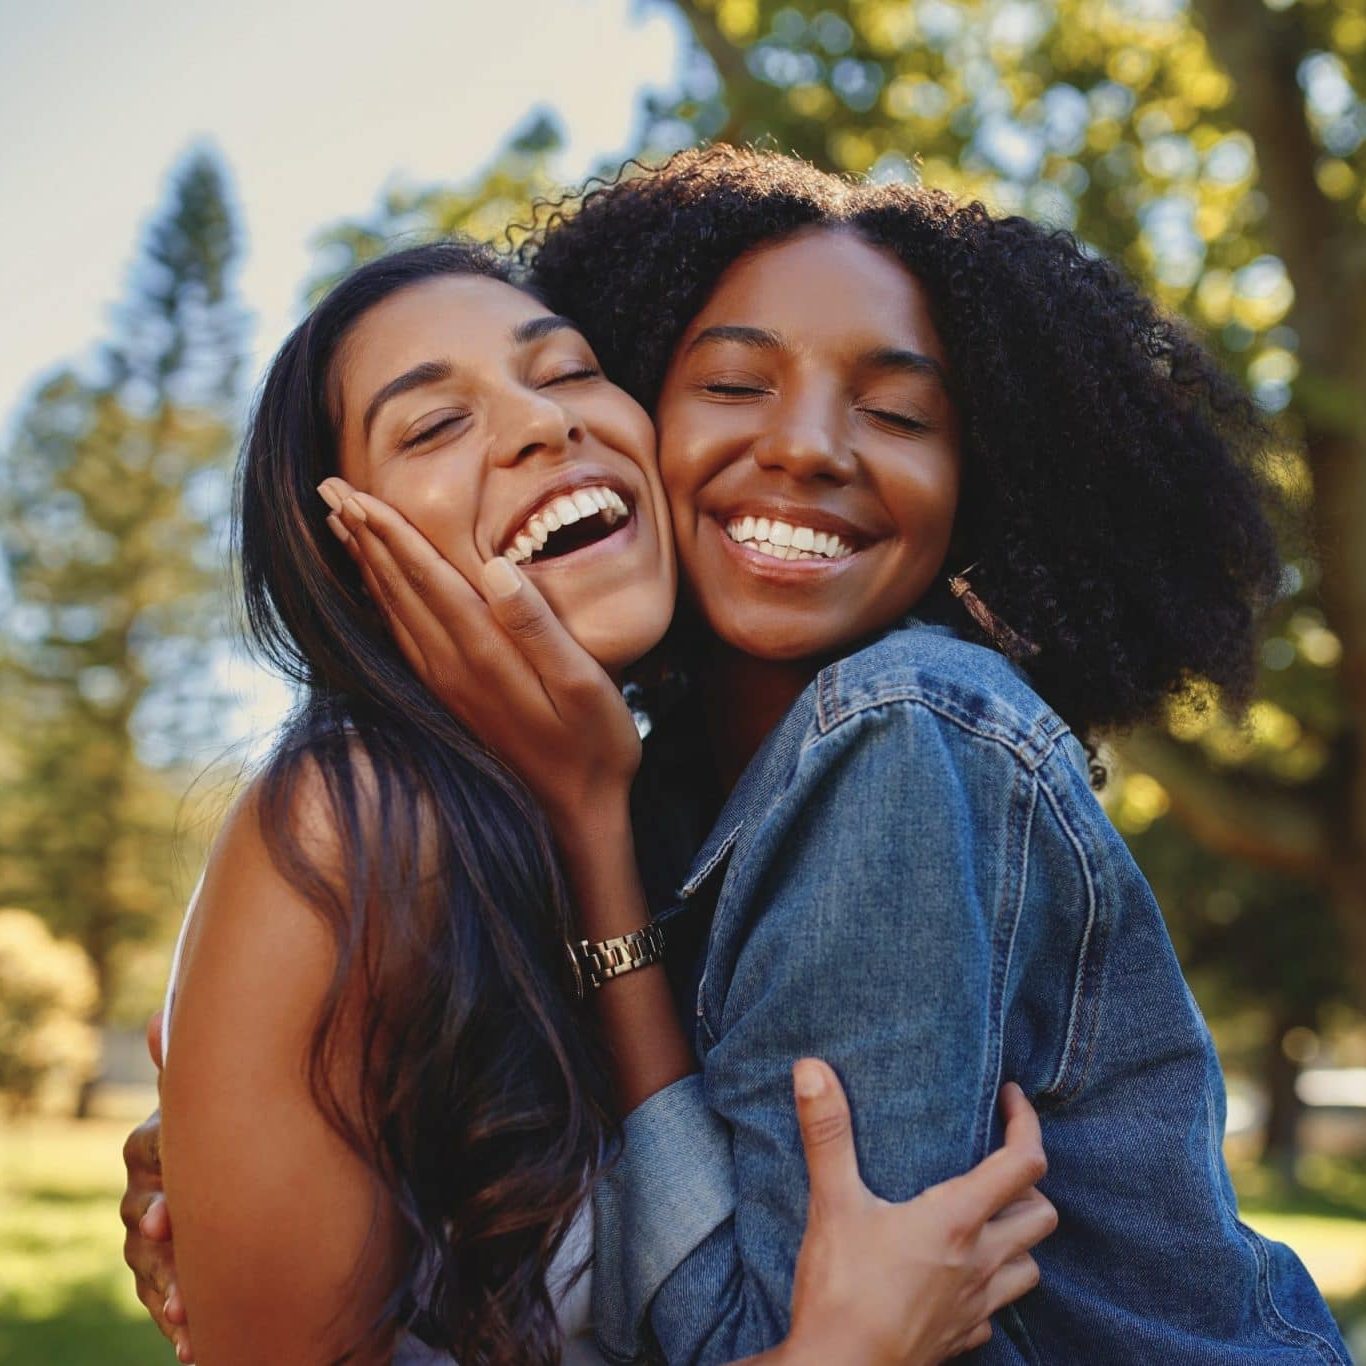 Diverse smiling female friends hugging each other in the park laughing and having fun